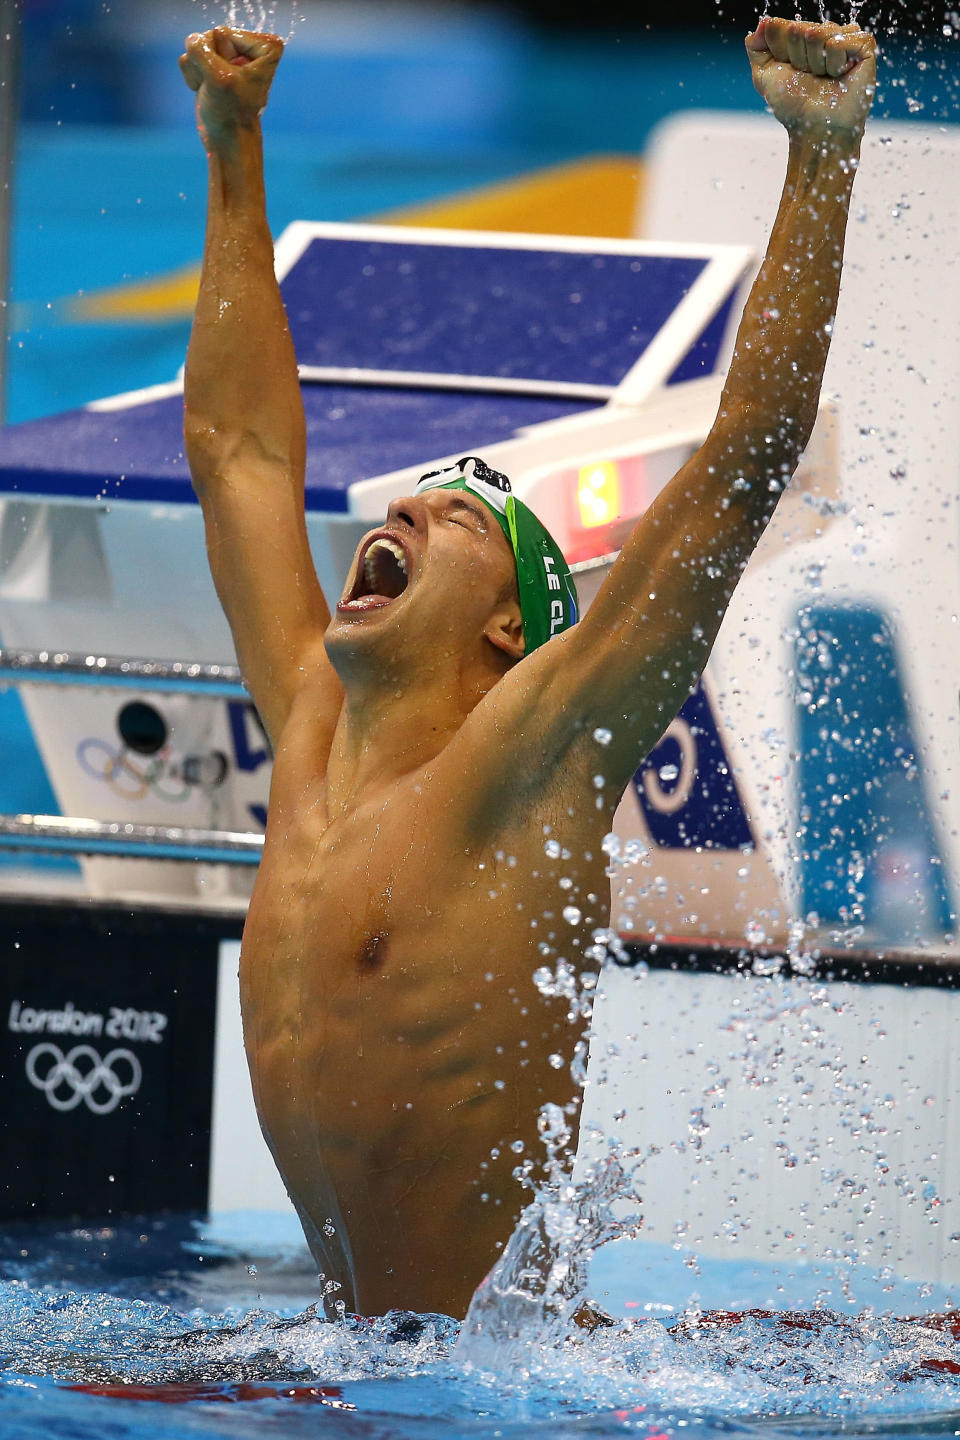 LONDON, ENGLAND - JULY 31: Chad le Clos of South Africa celebrates after winning the gold in the Men's 200m Butterfly final on Day 4 of the London 2012 Olympic Games at the Aquatics Centre on July 31, 2012 in London, England. (Photo by Al Bello/Getty Images)